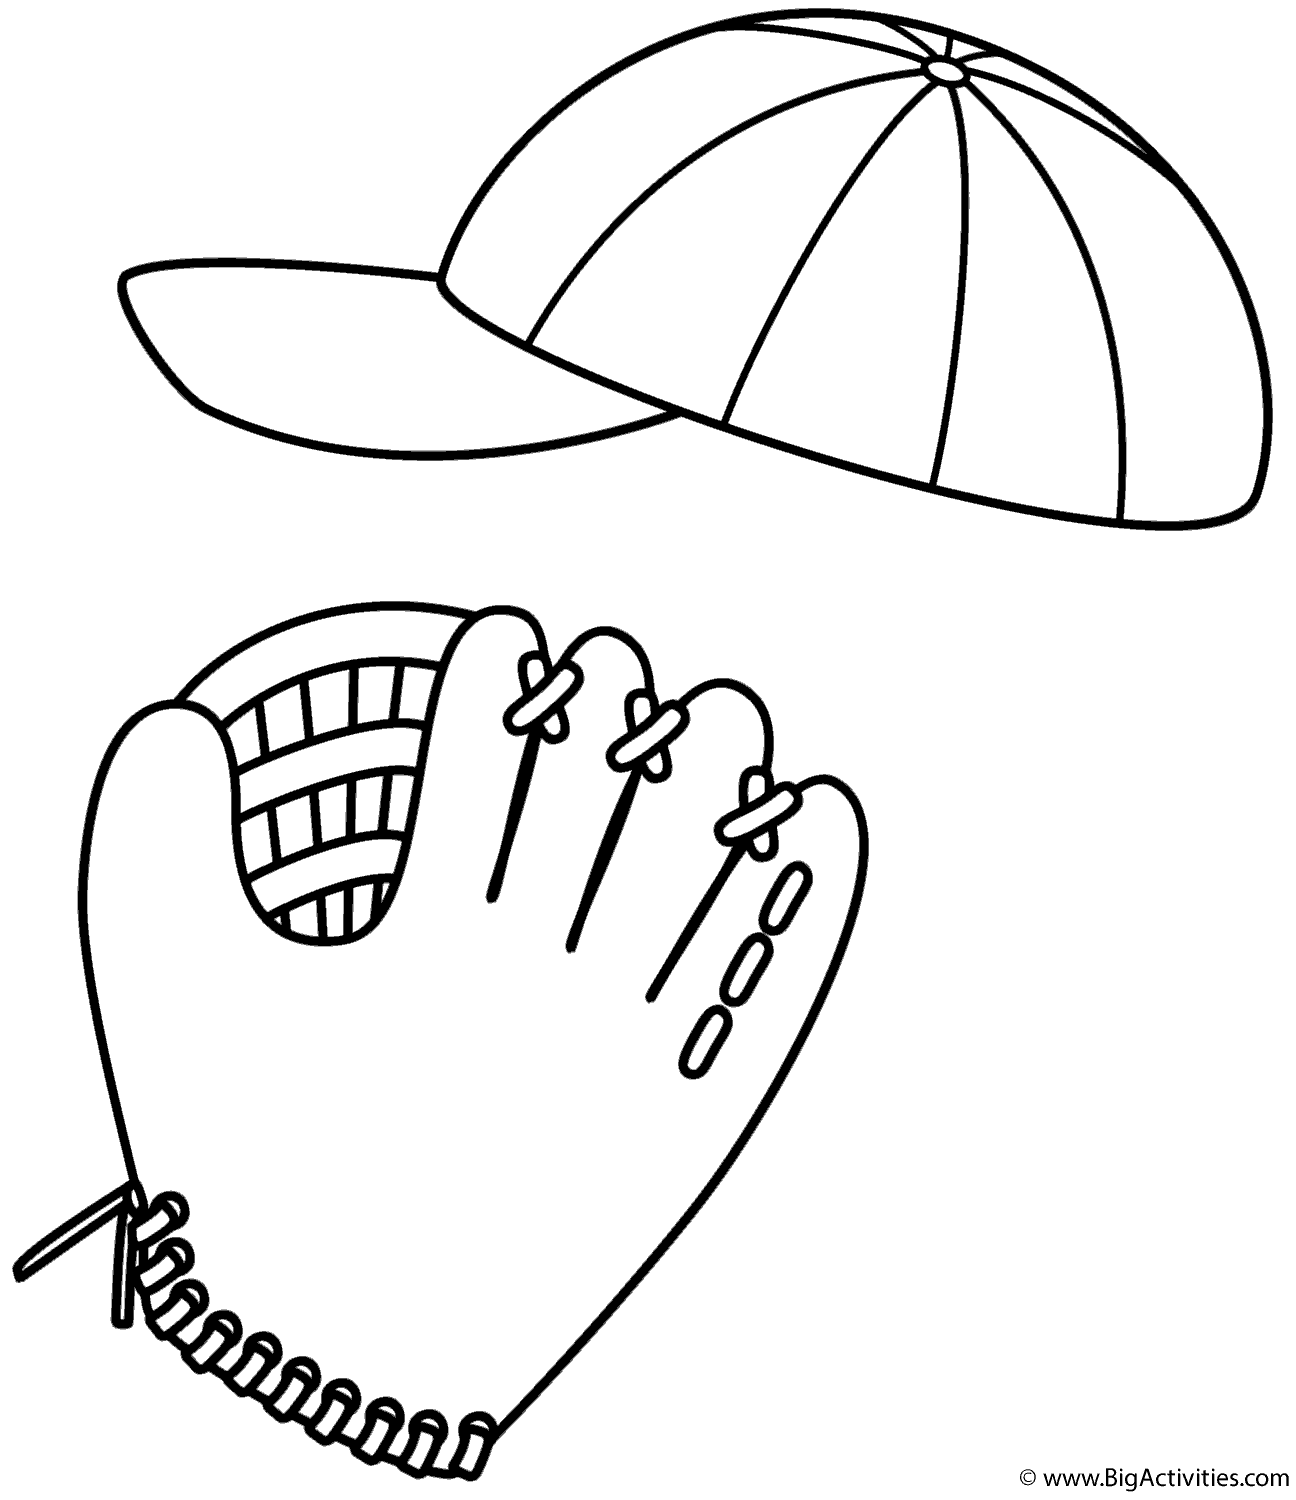 Baseball Cap and Glove - Coloring Page (Sports)